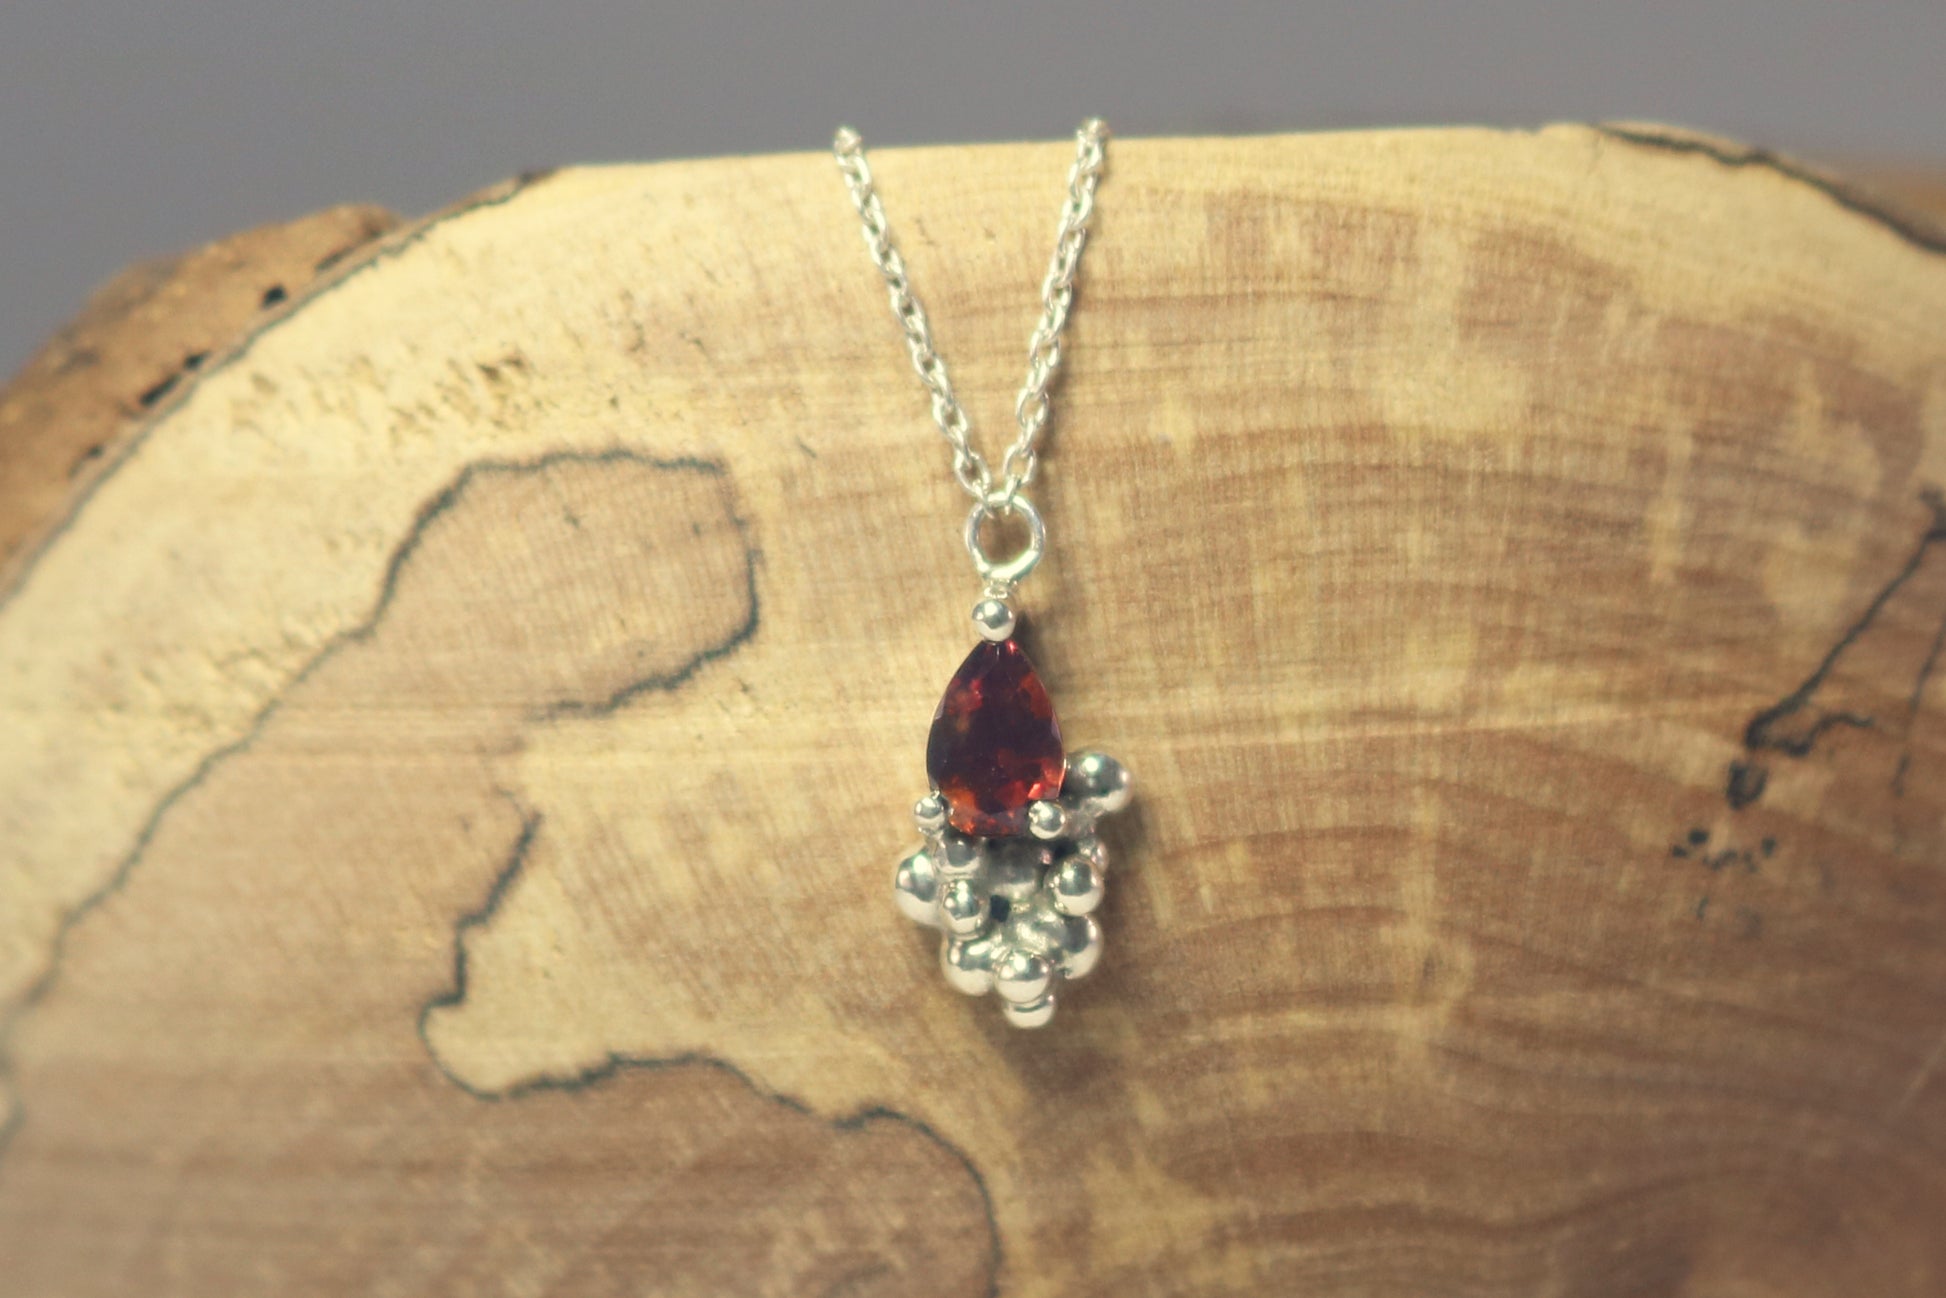 Pear shaped natural gemstone prong set in sterling silver with tumble bubble accent on a sterling silver chain.